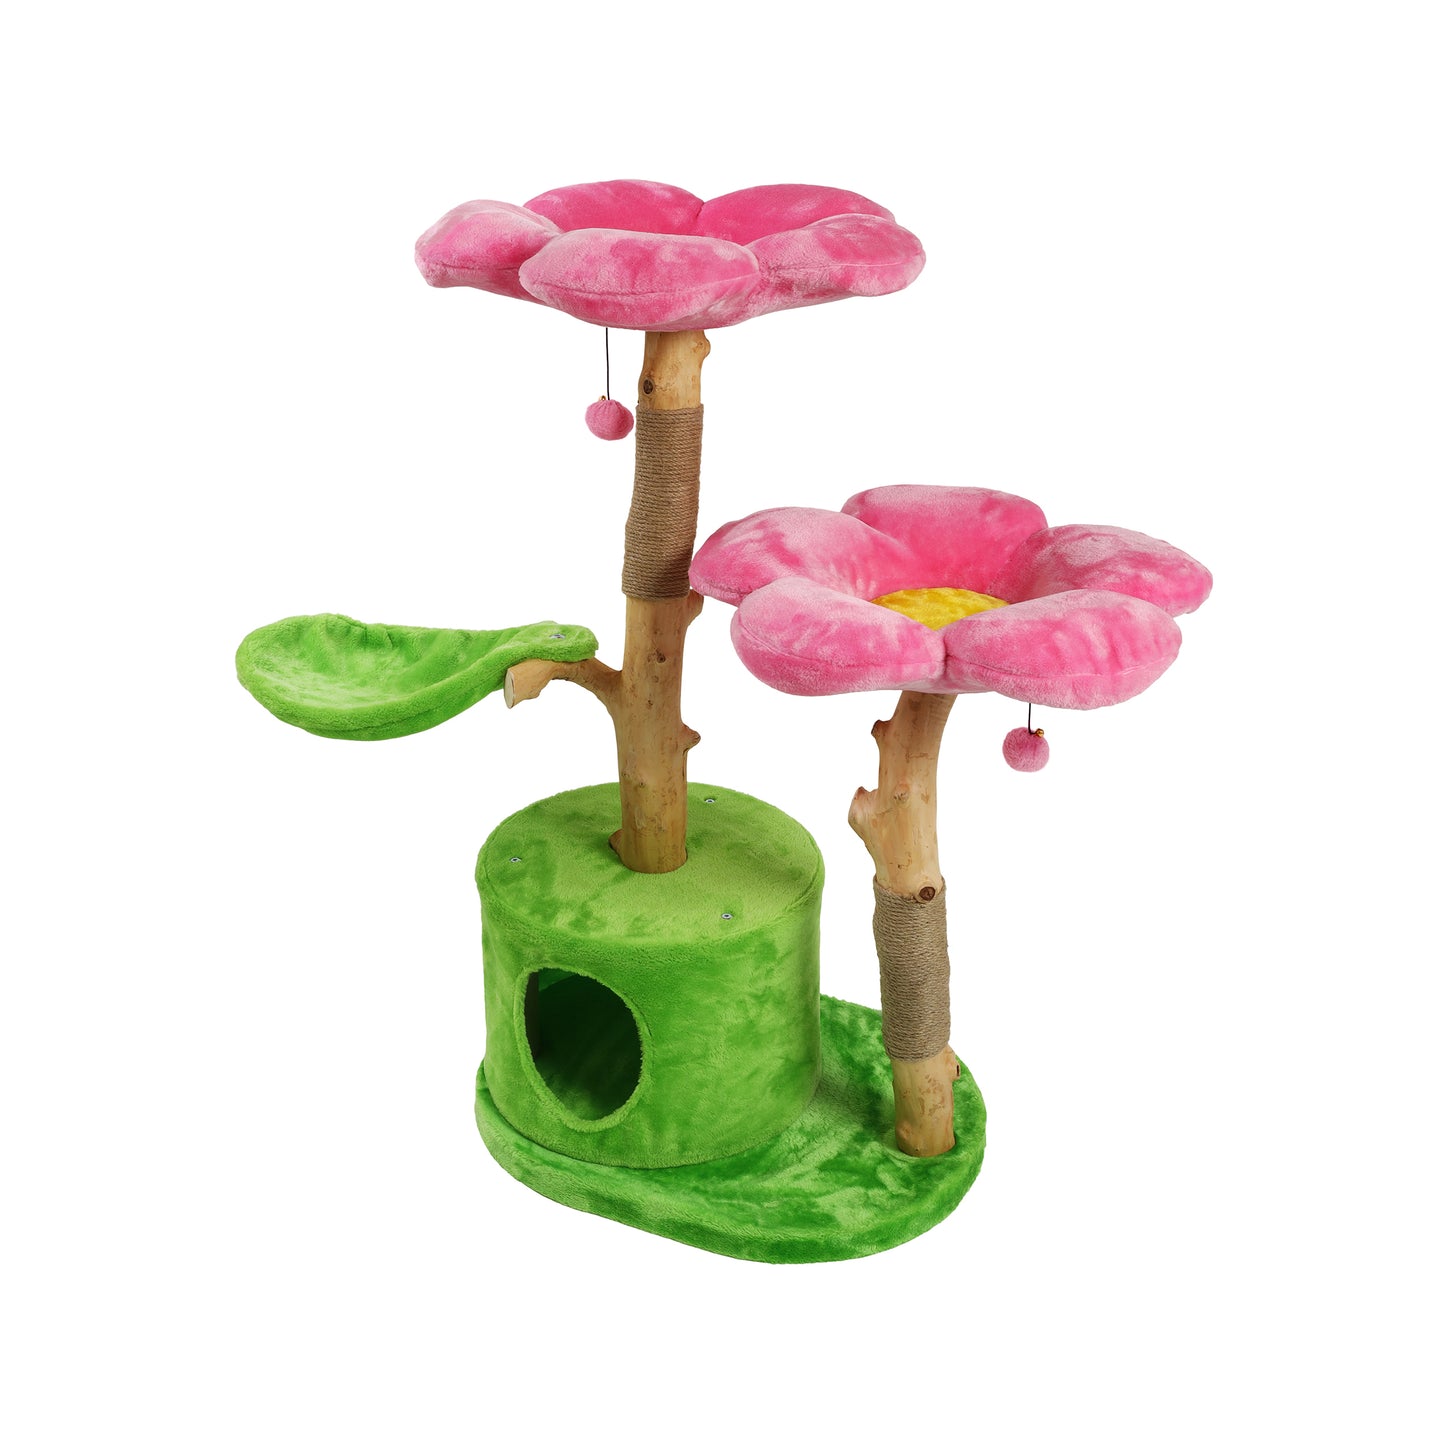 Floral Cat Tree with pink and green design, featuring two pink flowers